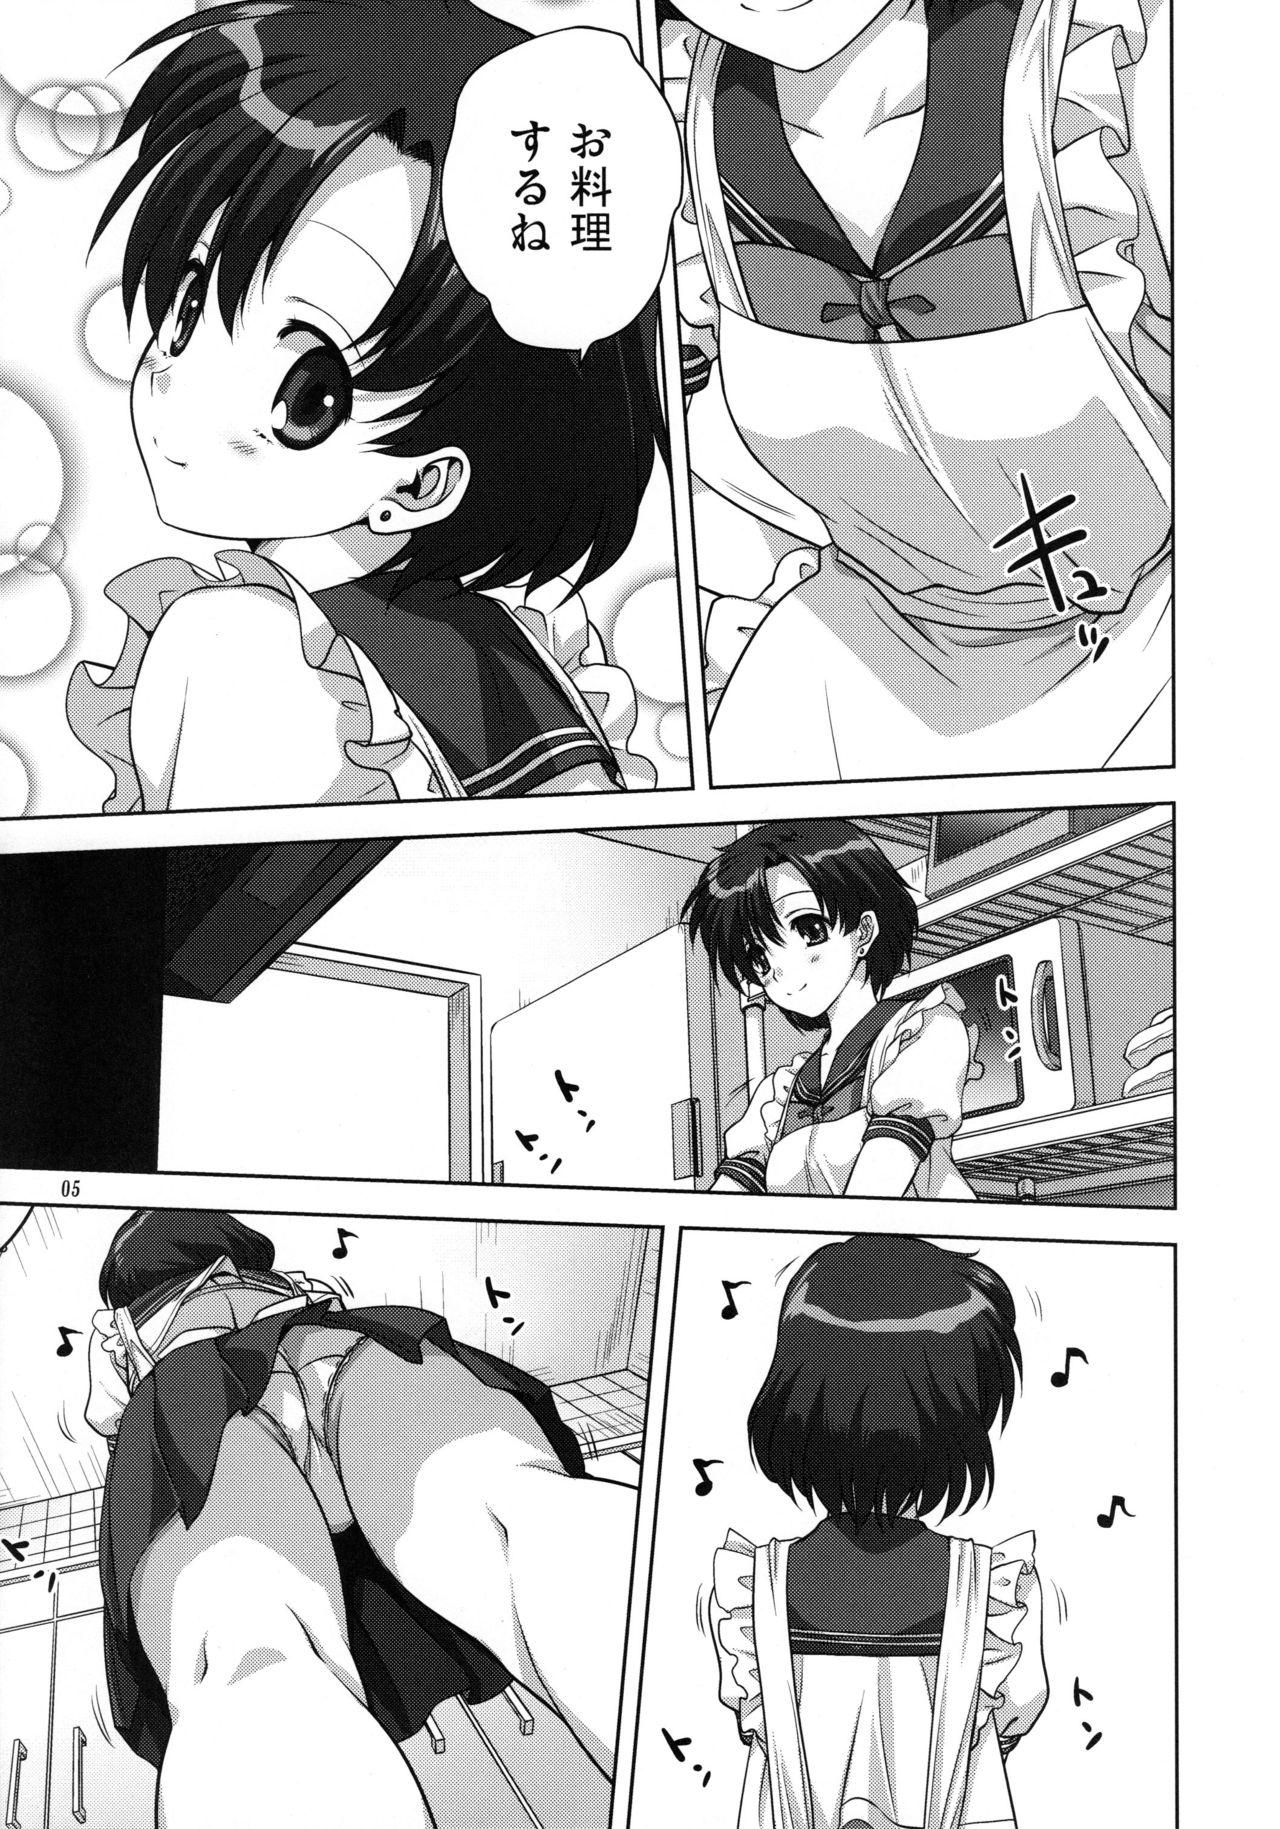 Hot Milf Ami-chan to Issho - Sailor moon Babes - Page 4